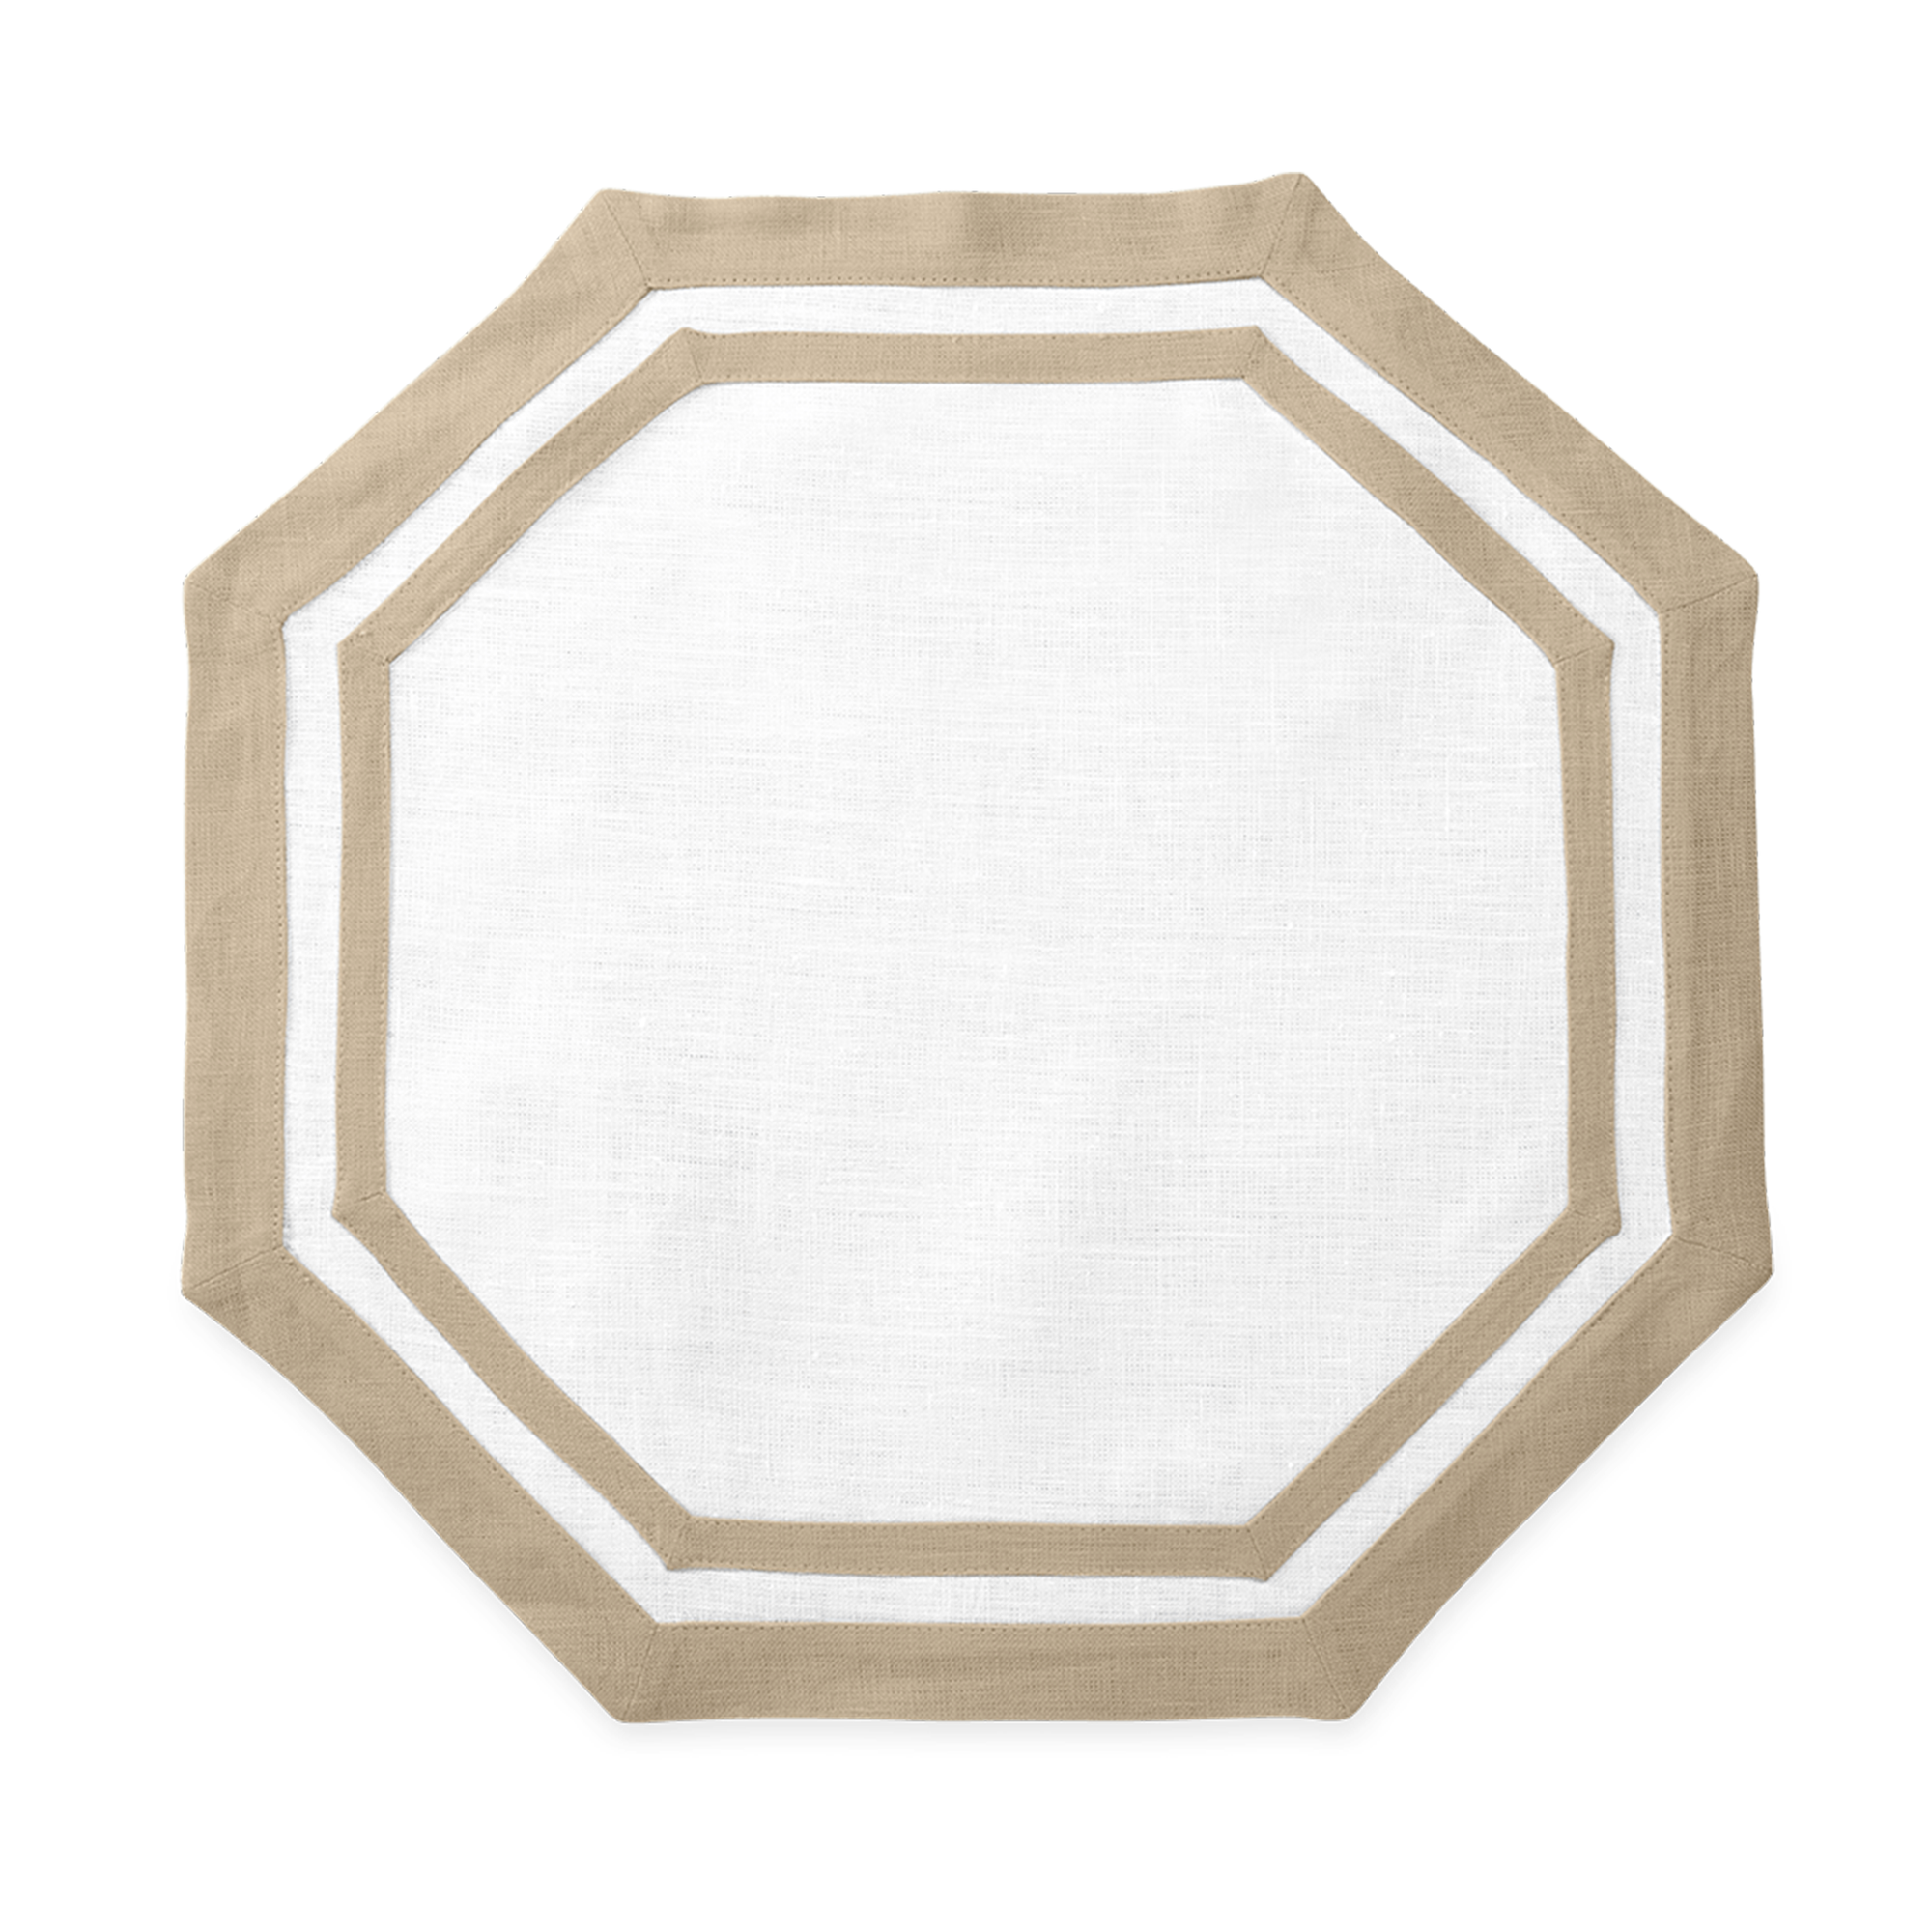 Silo Image of Matouk Double Border Octagon Placemat in Color Oat